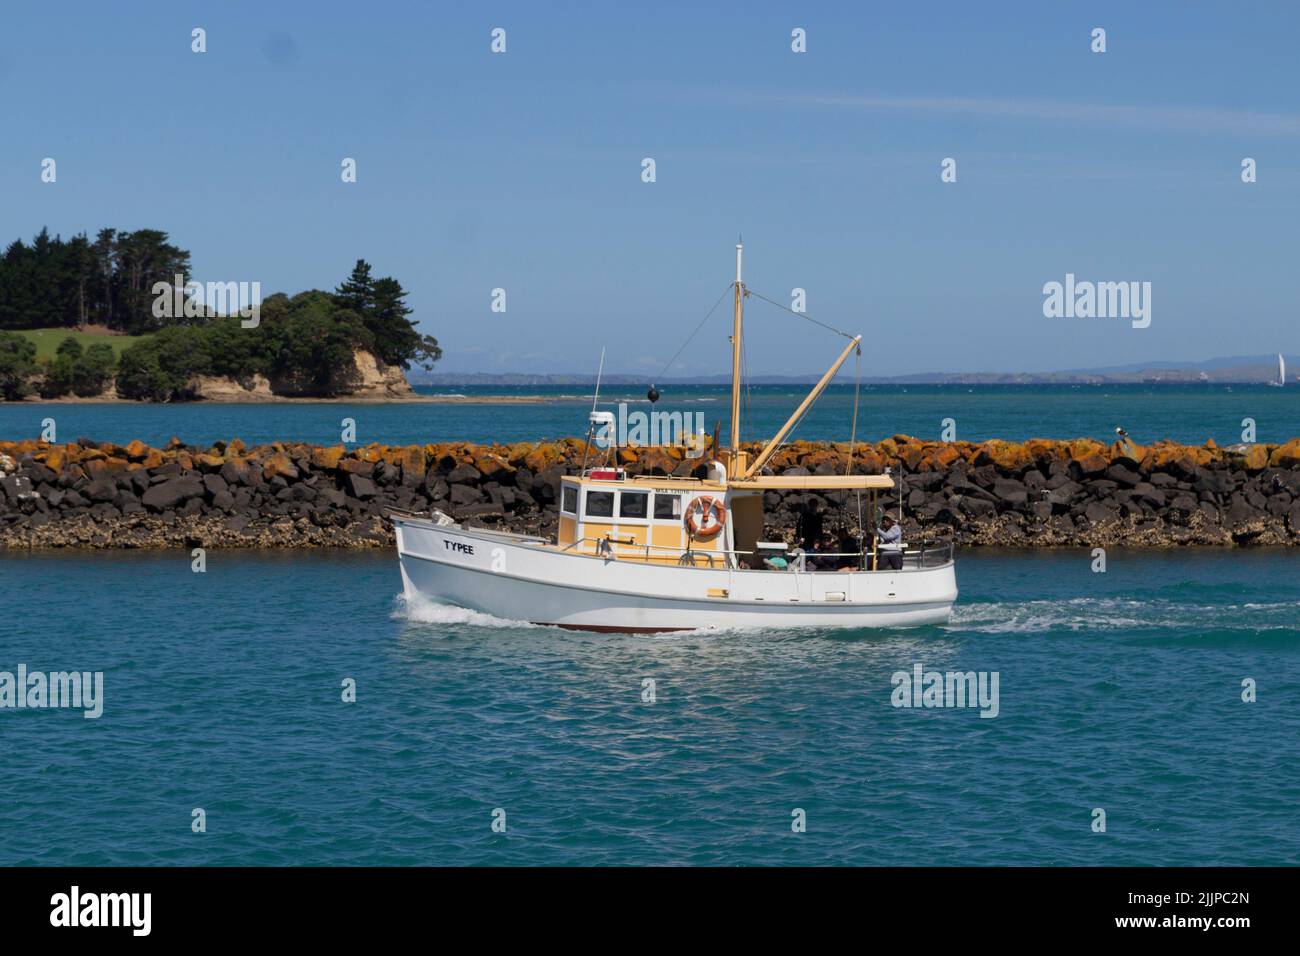 A fishing boat during summertime in Whangaparaoa, New Zealand Stock Photo